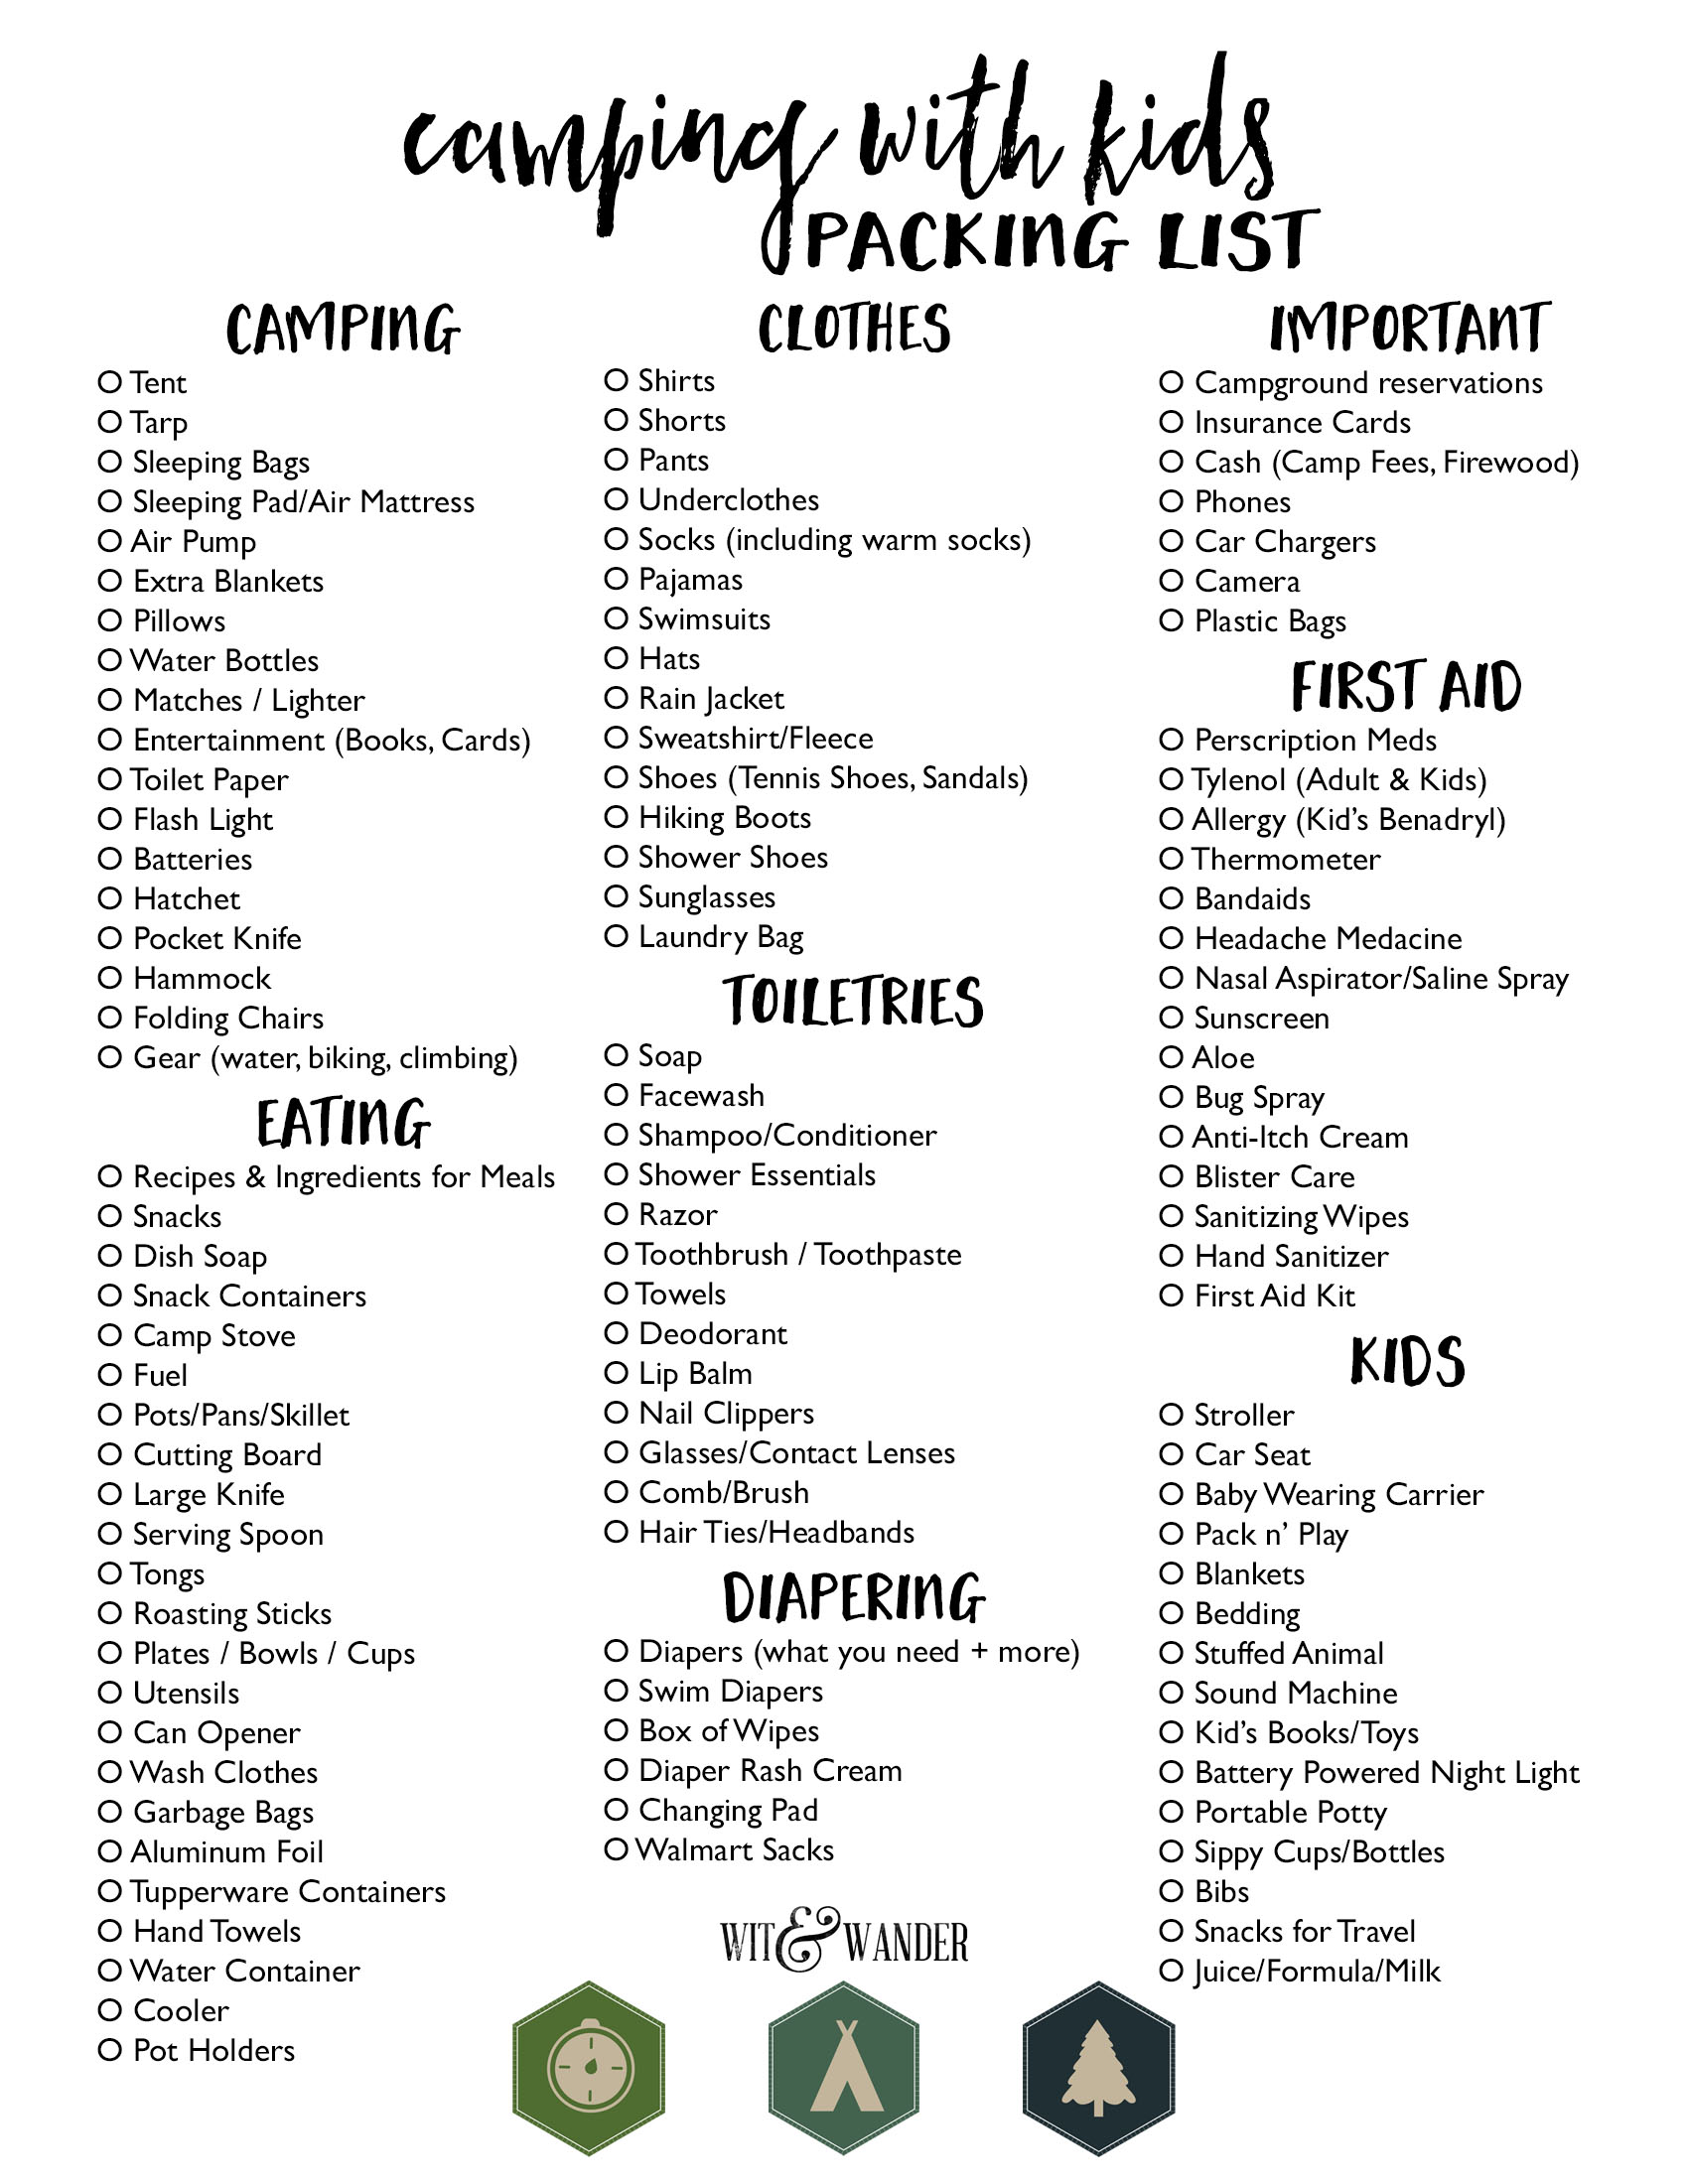 camping-with-kids-packing-list-wit-wander-camping-with-kids-packing